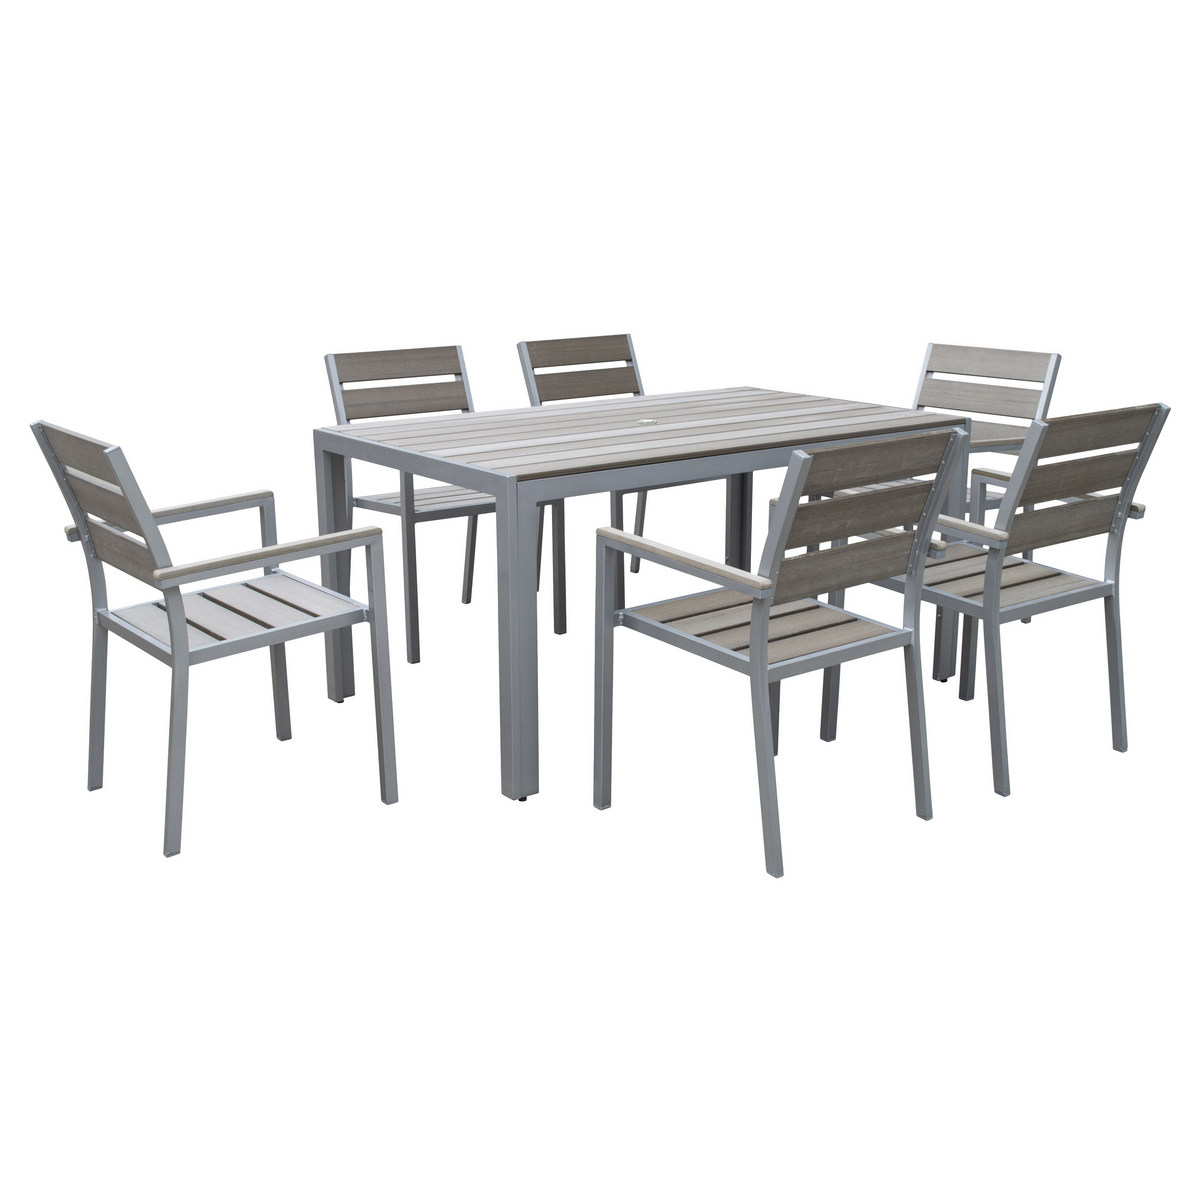 Corliving Pjr-572-z2 Gallant 7pc Sun Bleached Grey Outdoor Dining Set